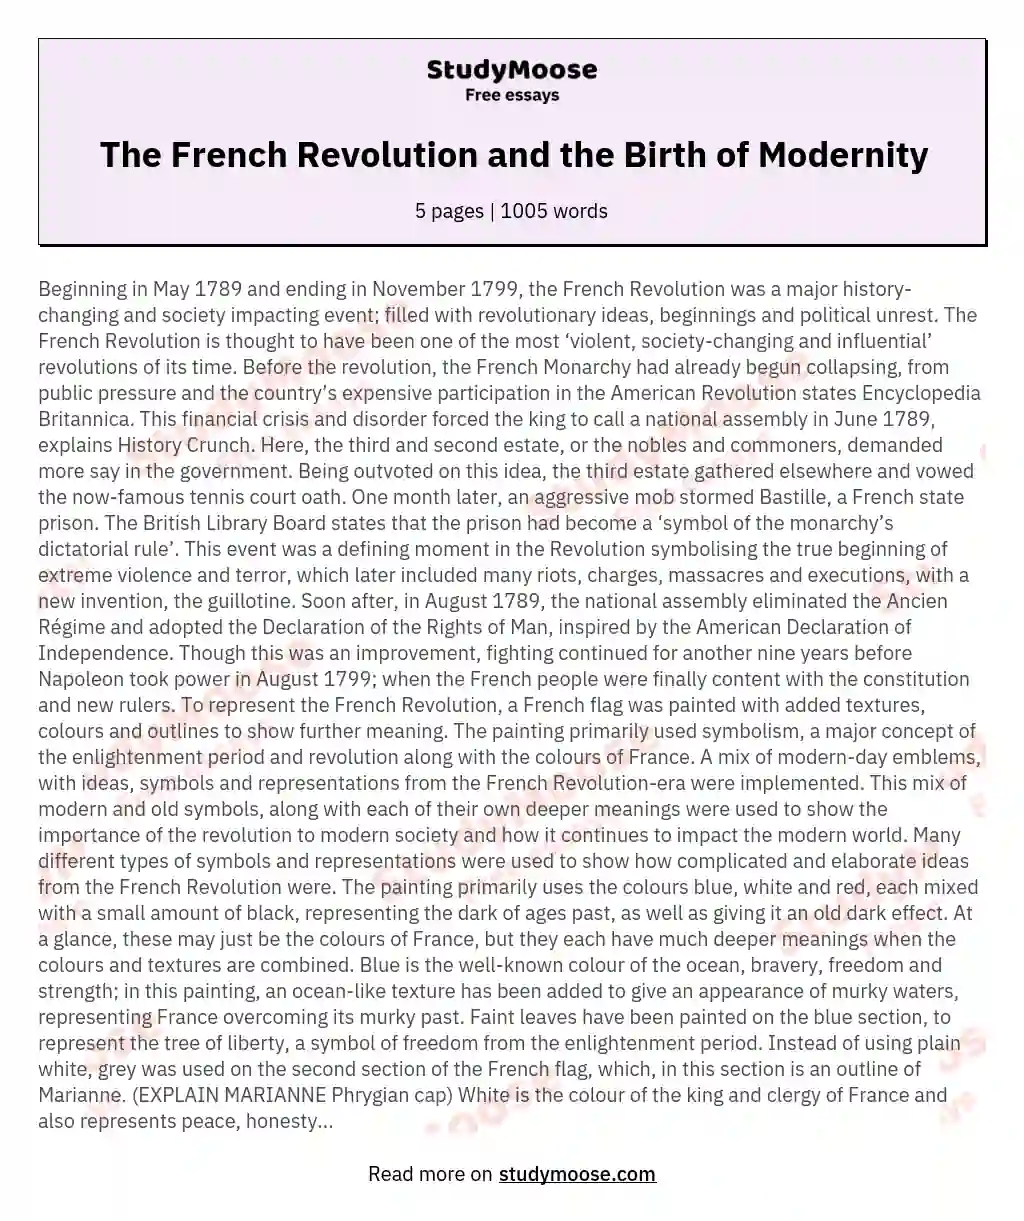 The French Revolution and the Birth of Modernity essay